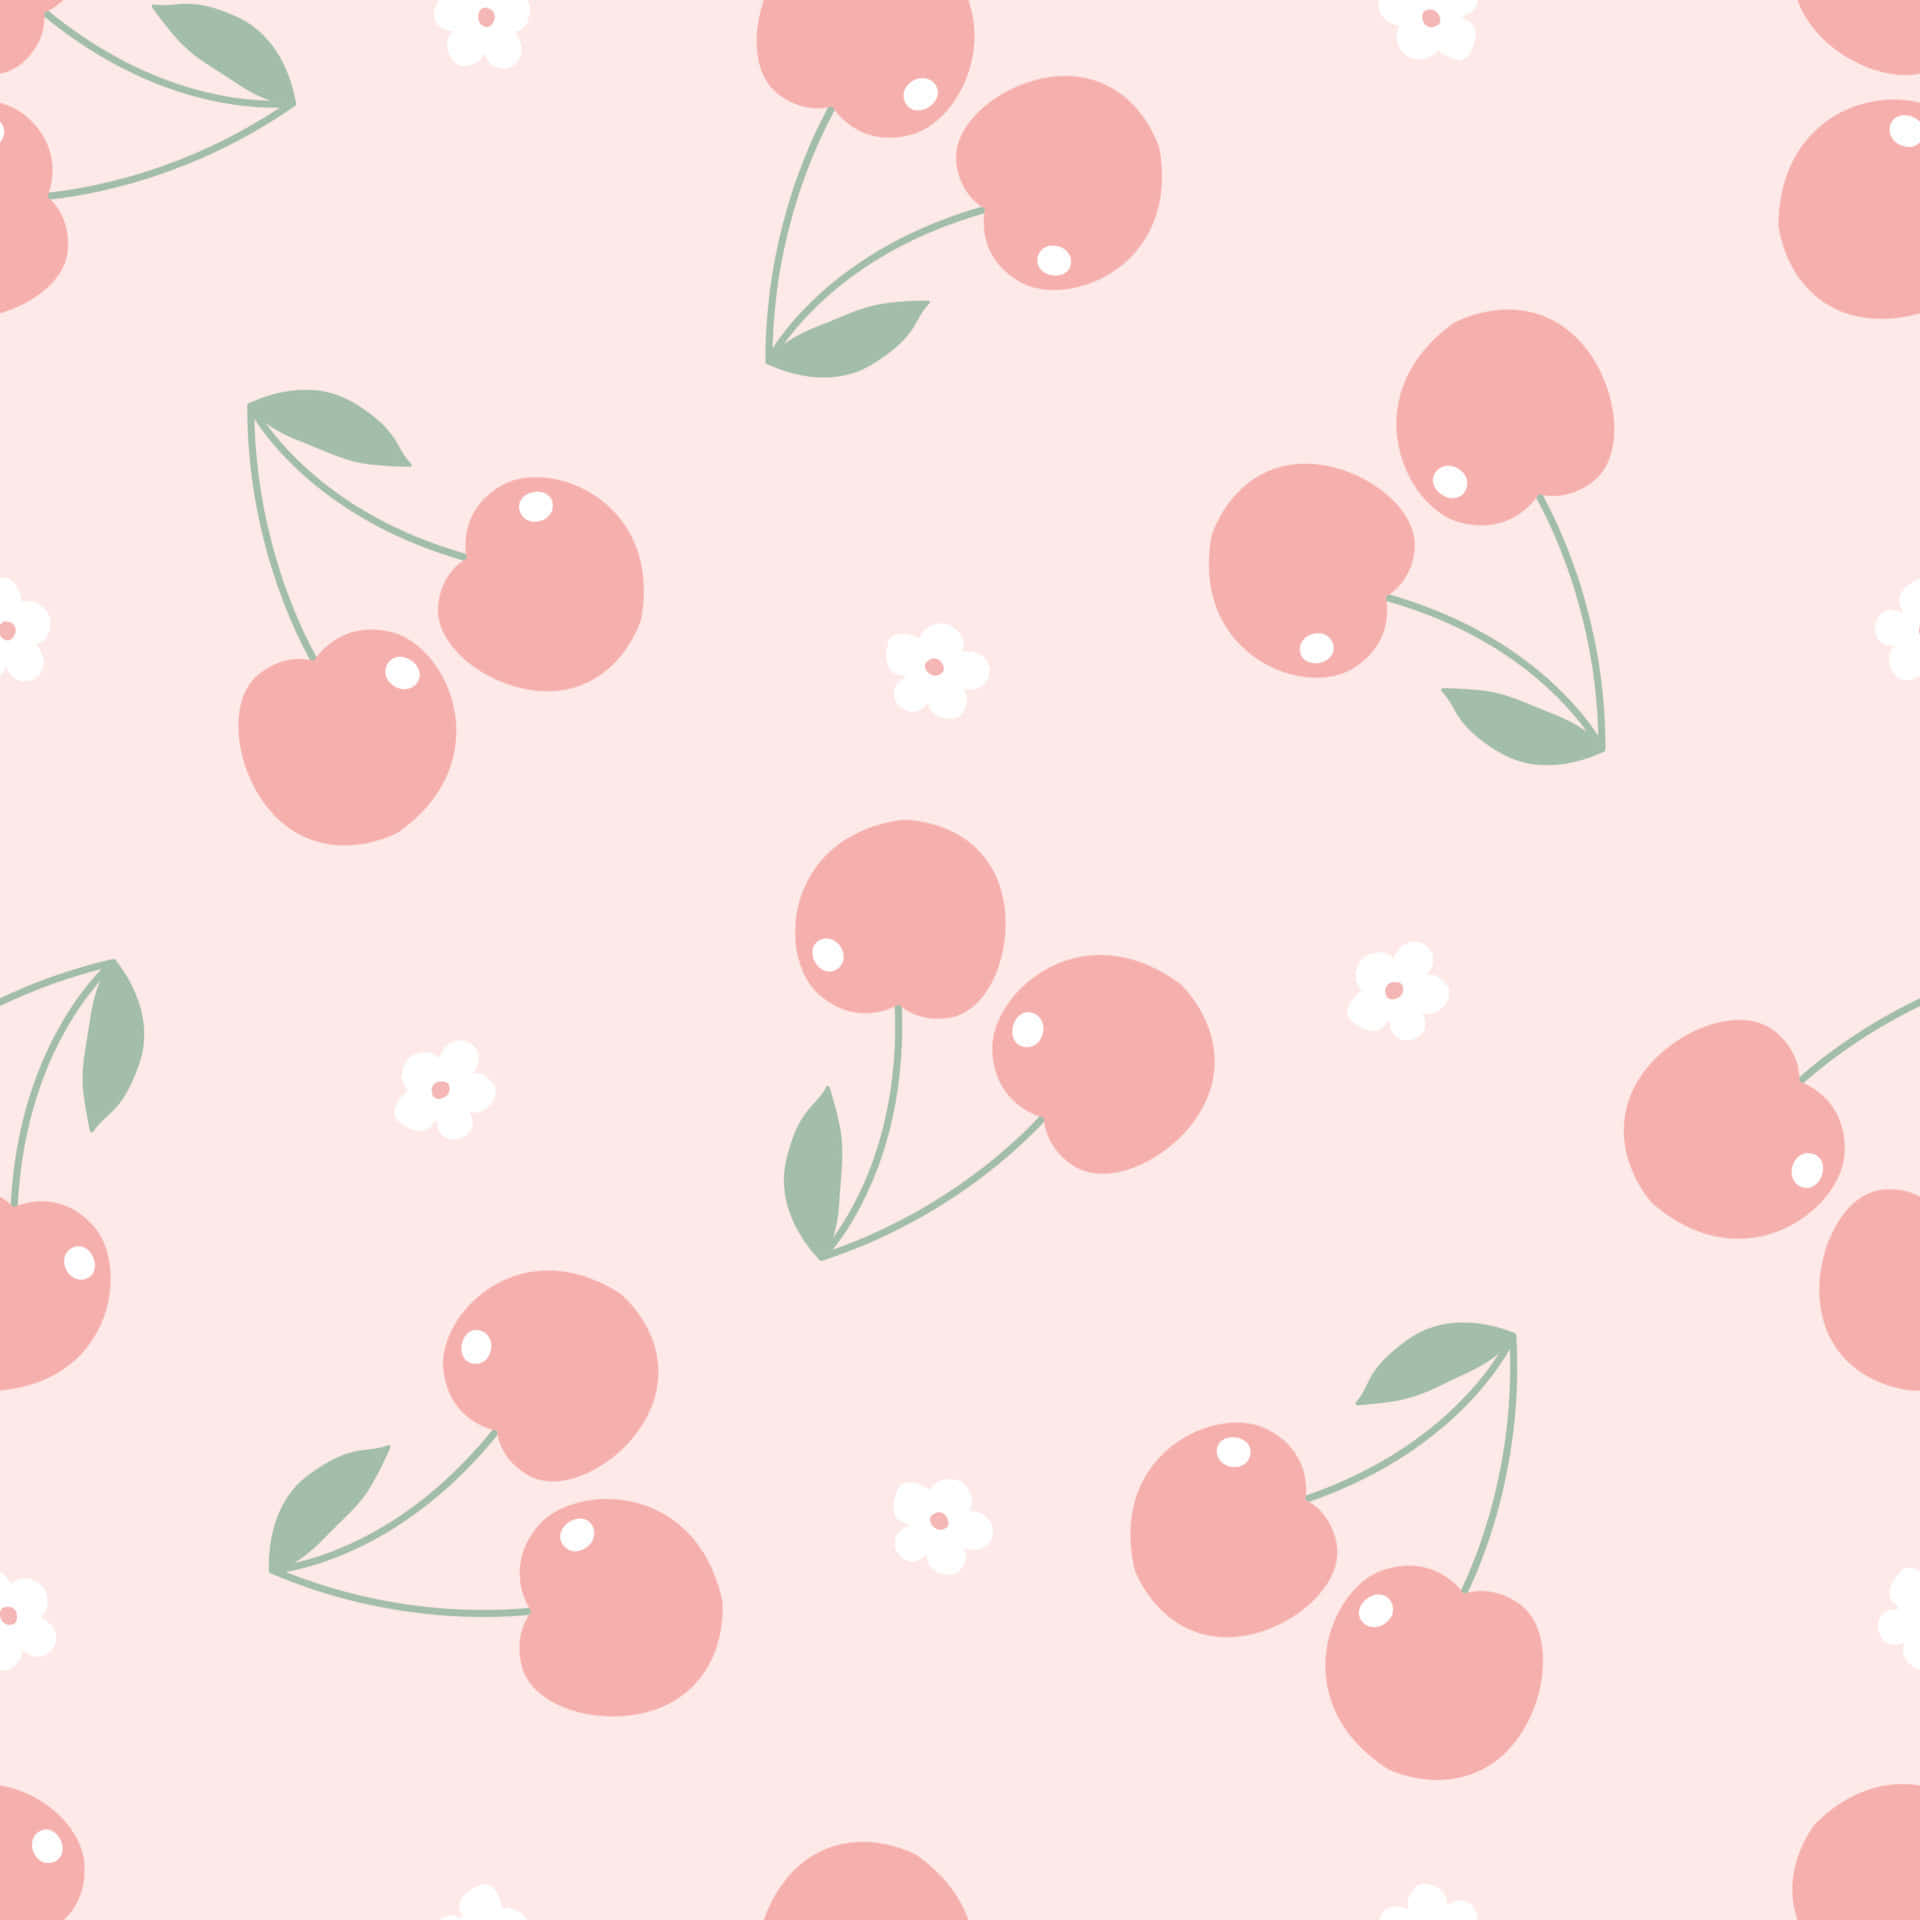 Download Cute Pink Cherries With Tiny Flowers Wallpaper | Wallpapers.com